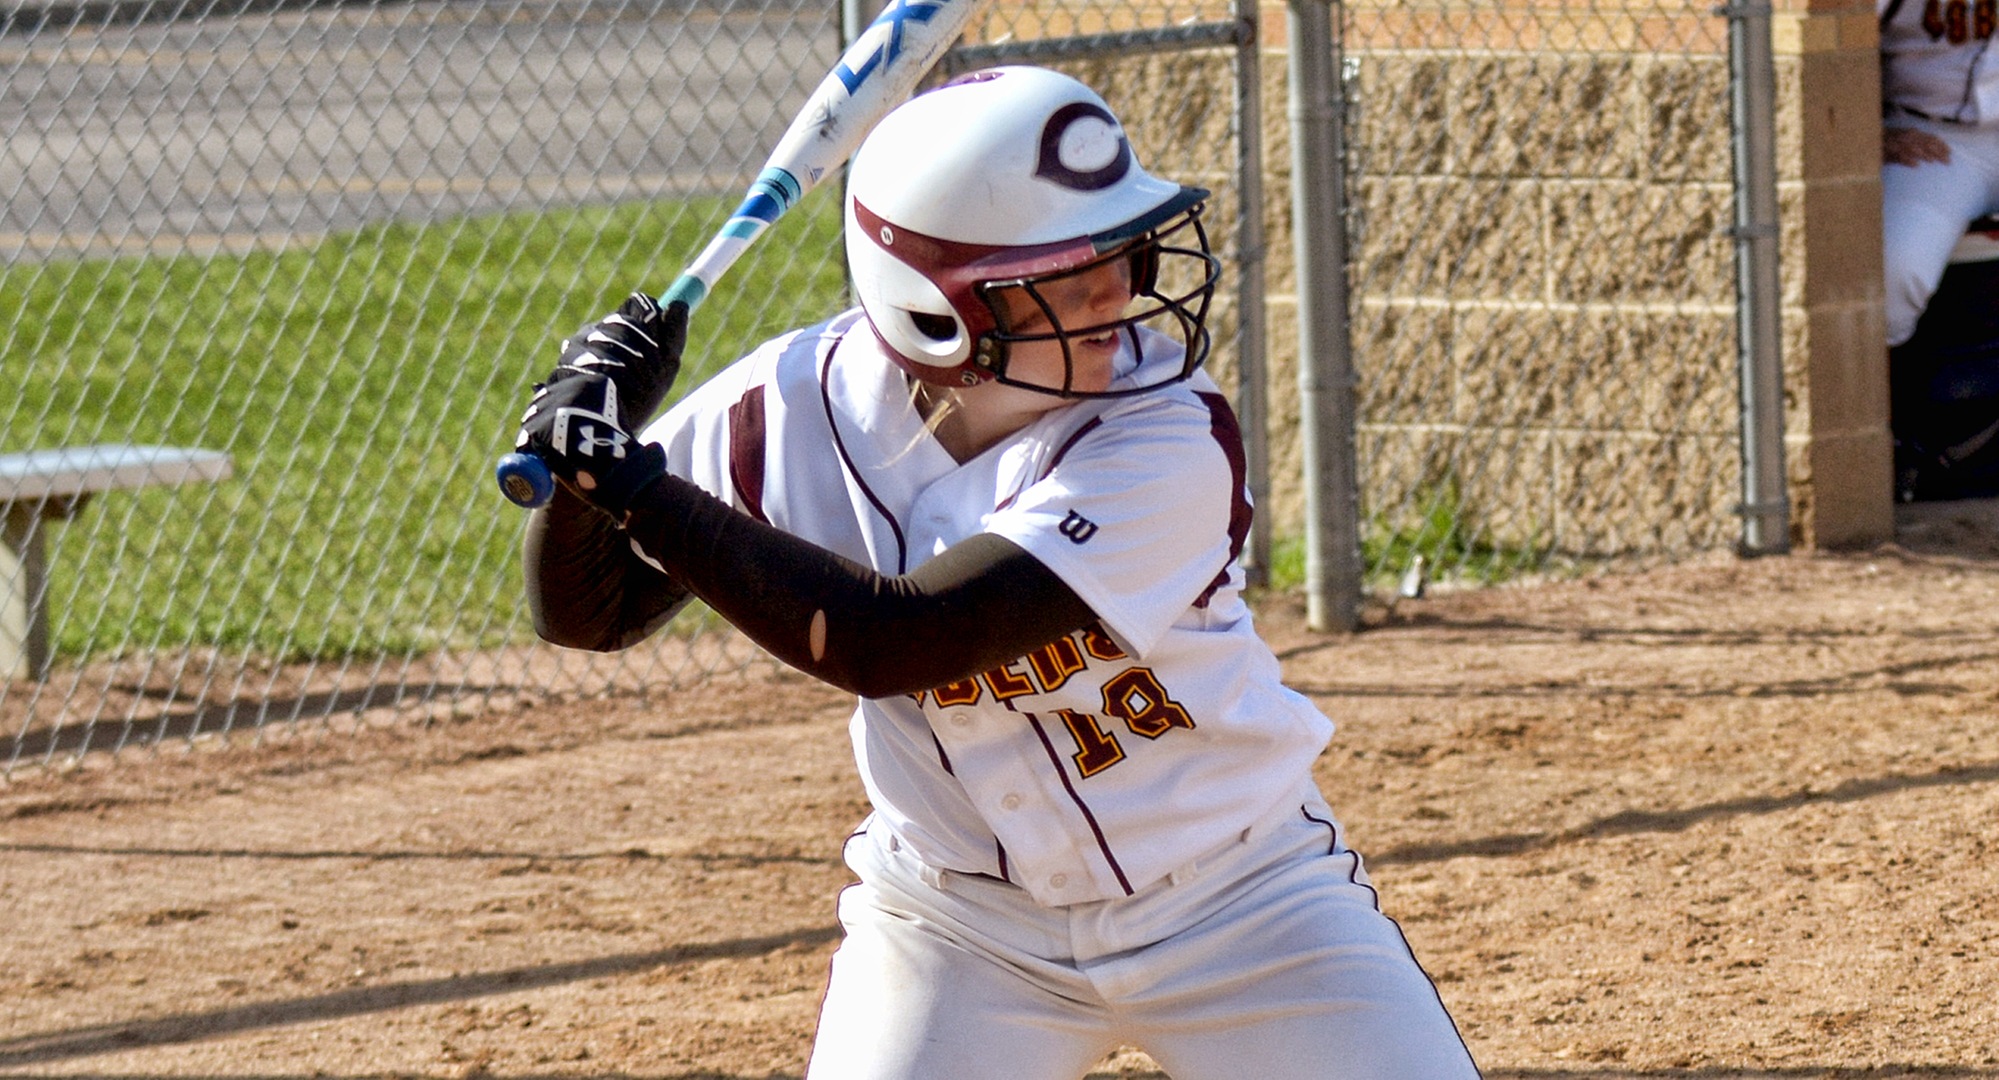 Senior Brooke Swarthout hit one of the three Cobber home runs in their two wins on the opening day of the season.